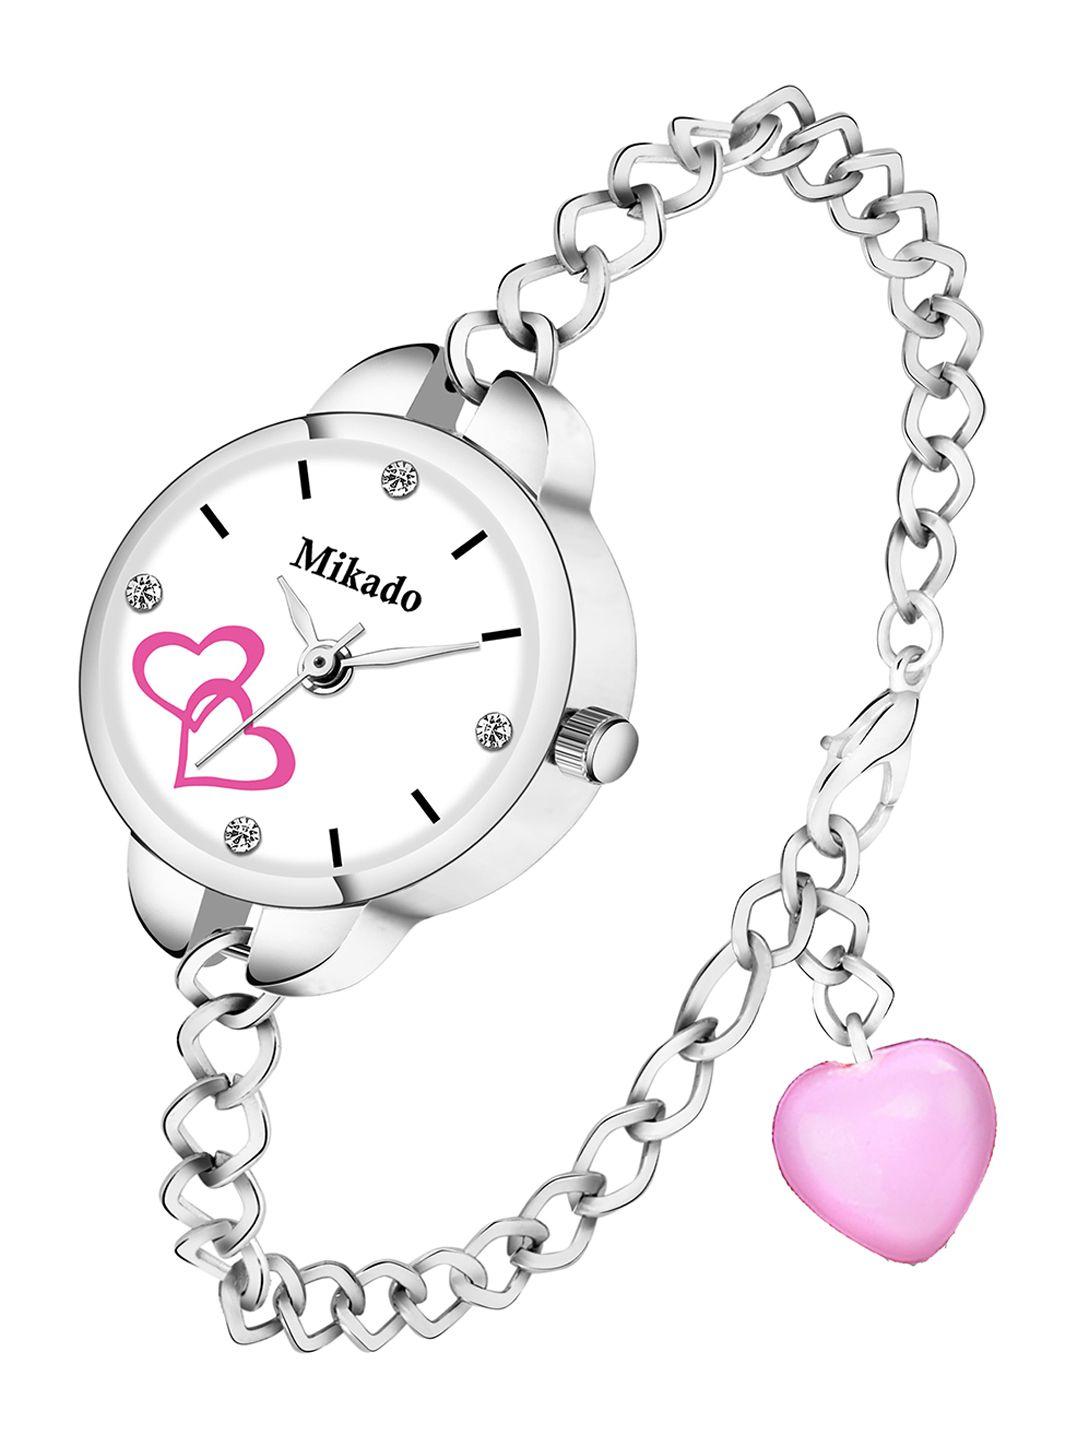 mikado-women-stainless-steel-bracelet-style-straps-analogue-watch-pink-chain-dil